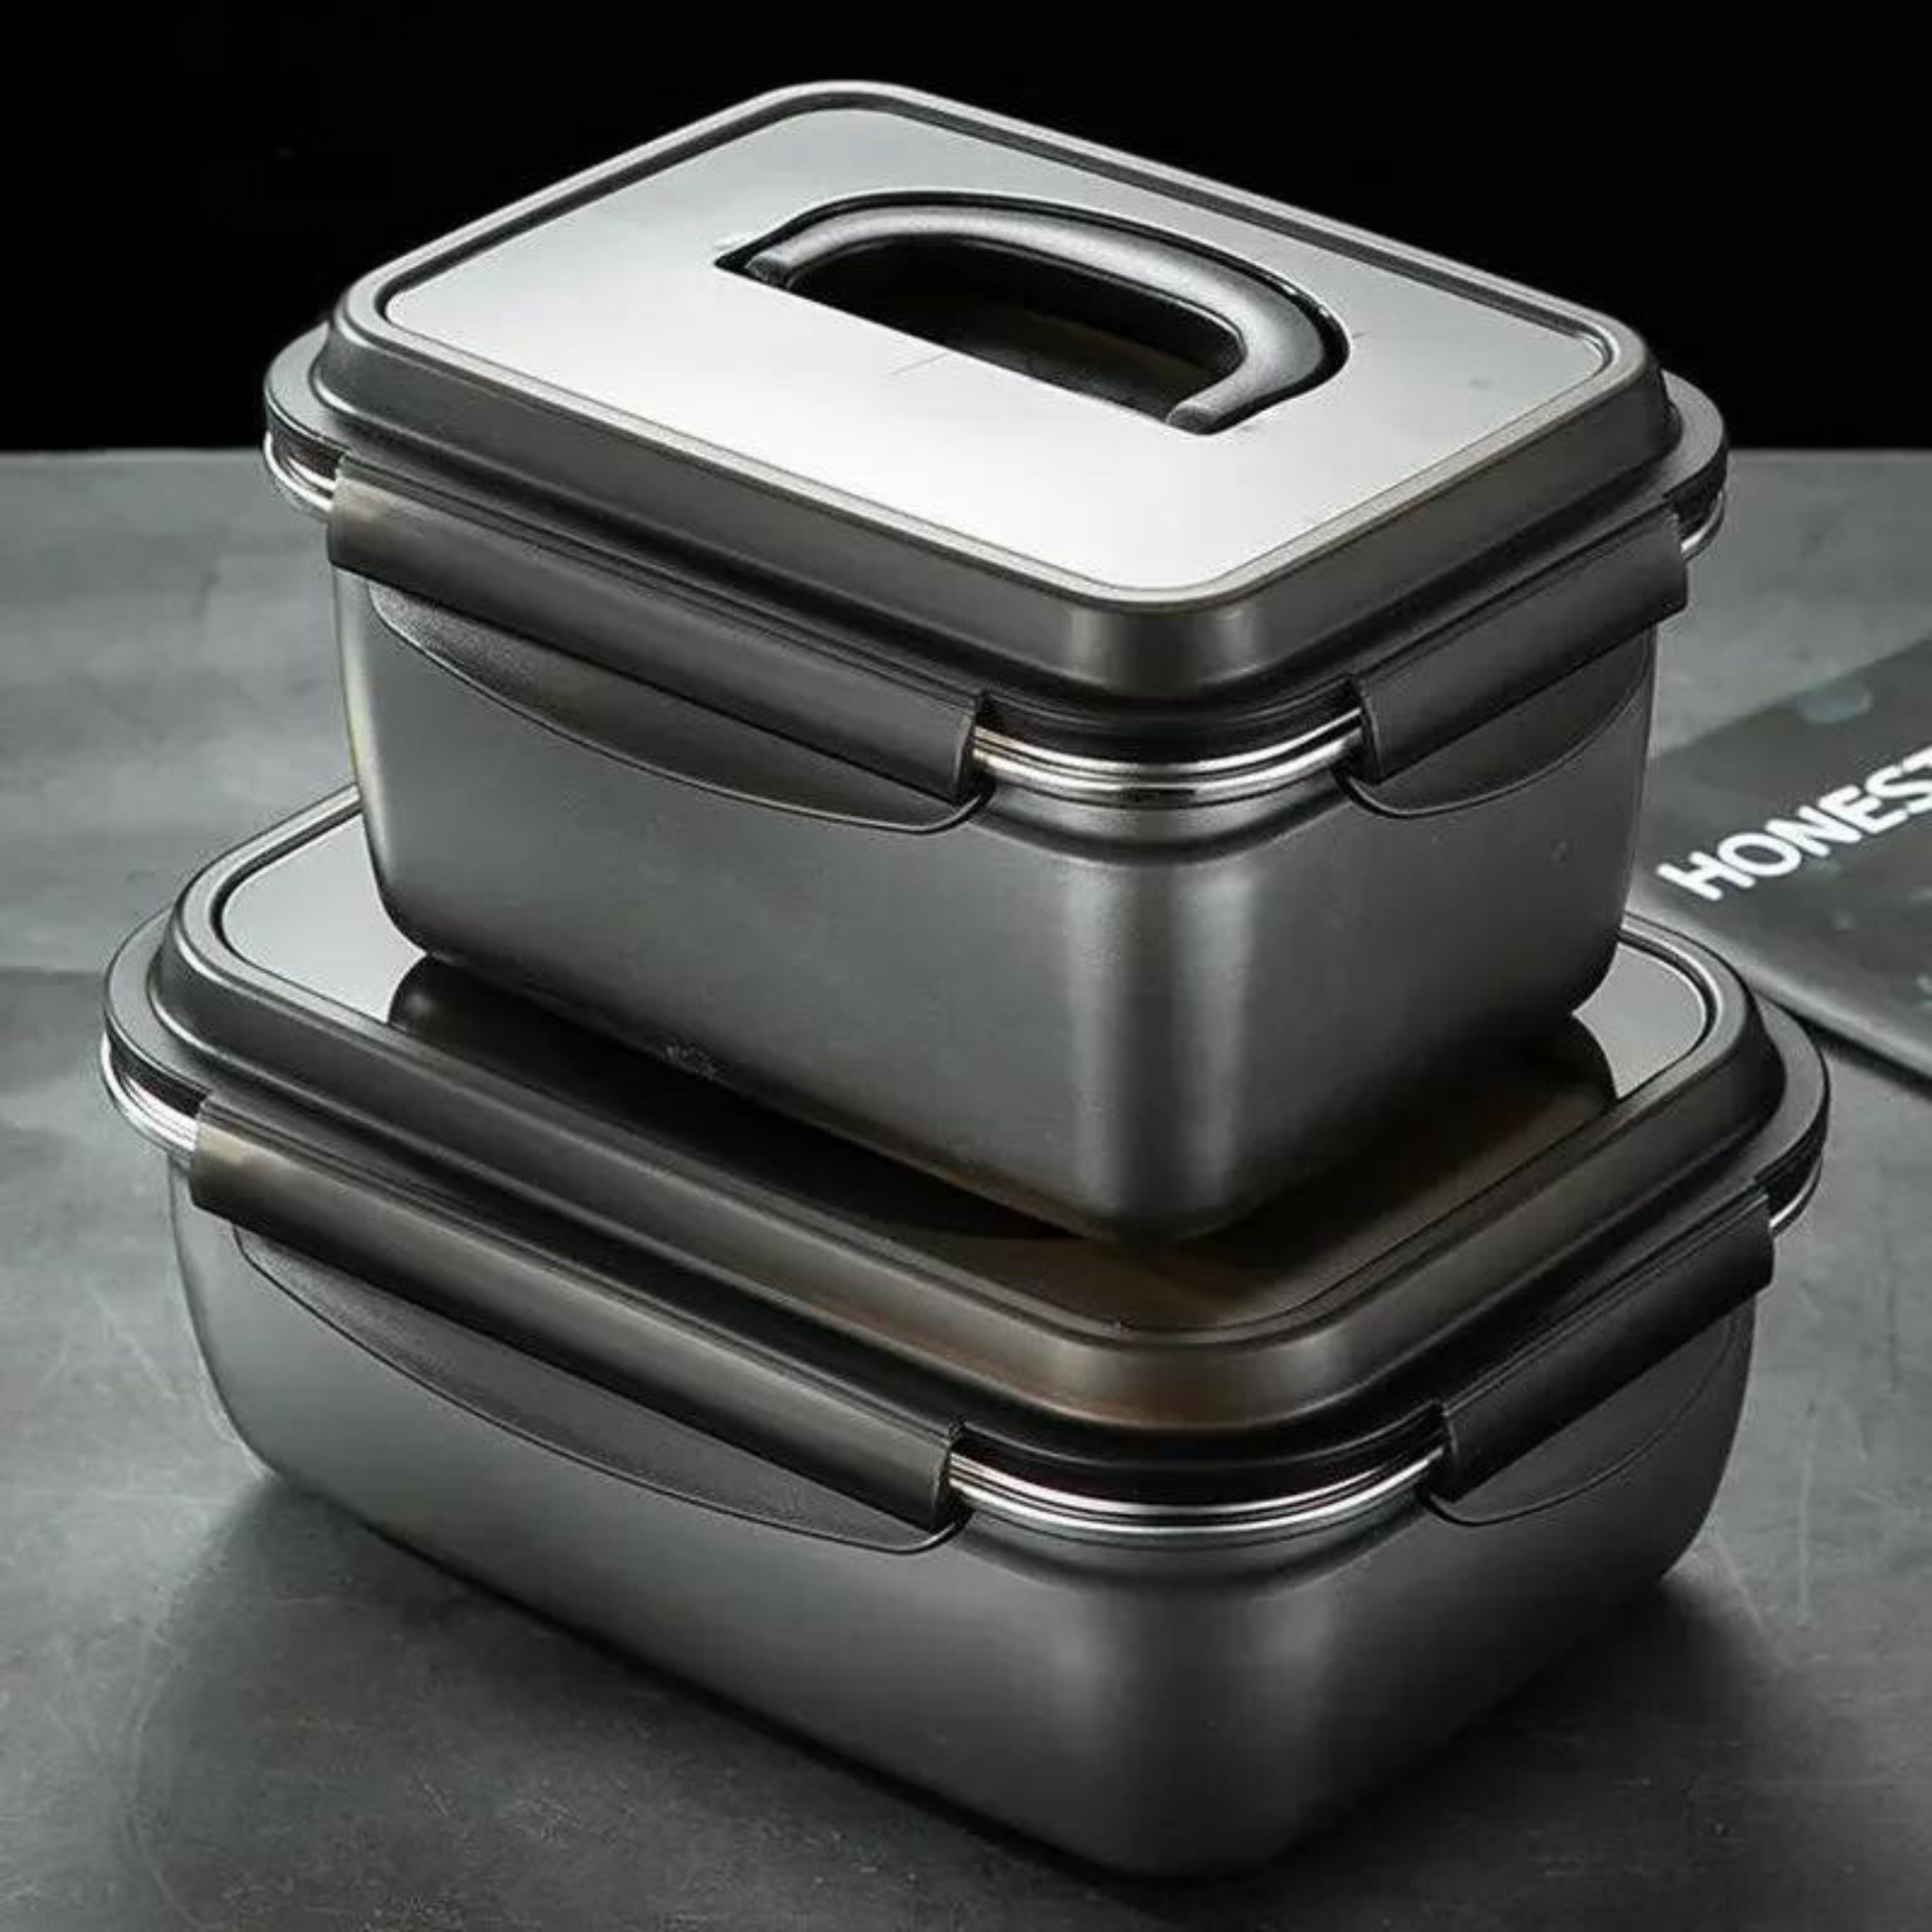 Large Capacity Stainless Steel Outdoor Portable Lunch Bento Box: Two stacked stainless steel lunch bento boxes, showcasing their versatile and space-saving design. Ideal for meal prep and lunch containers.